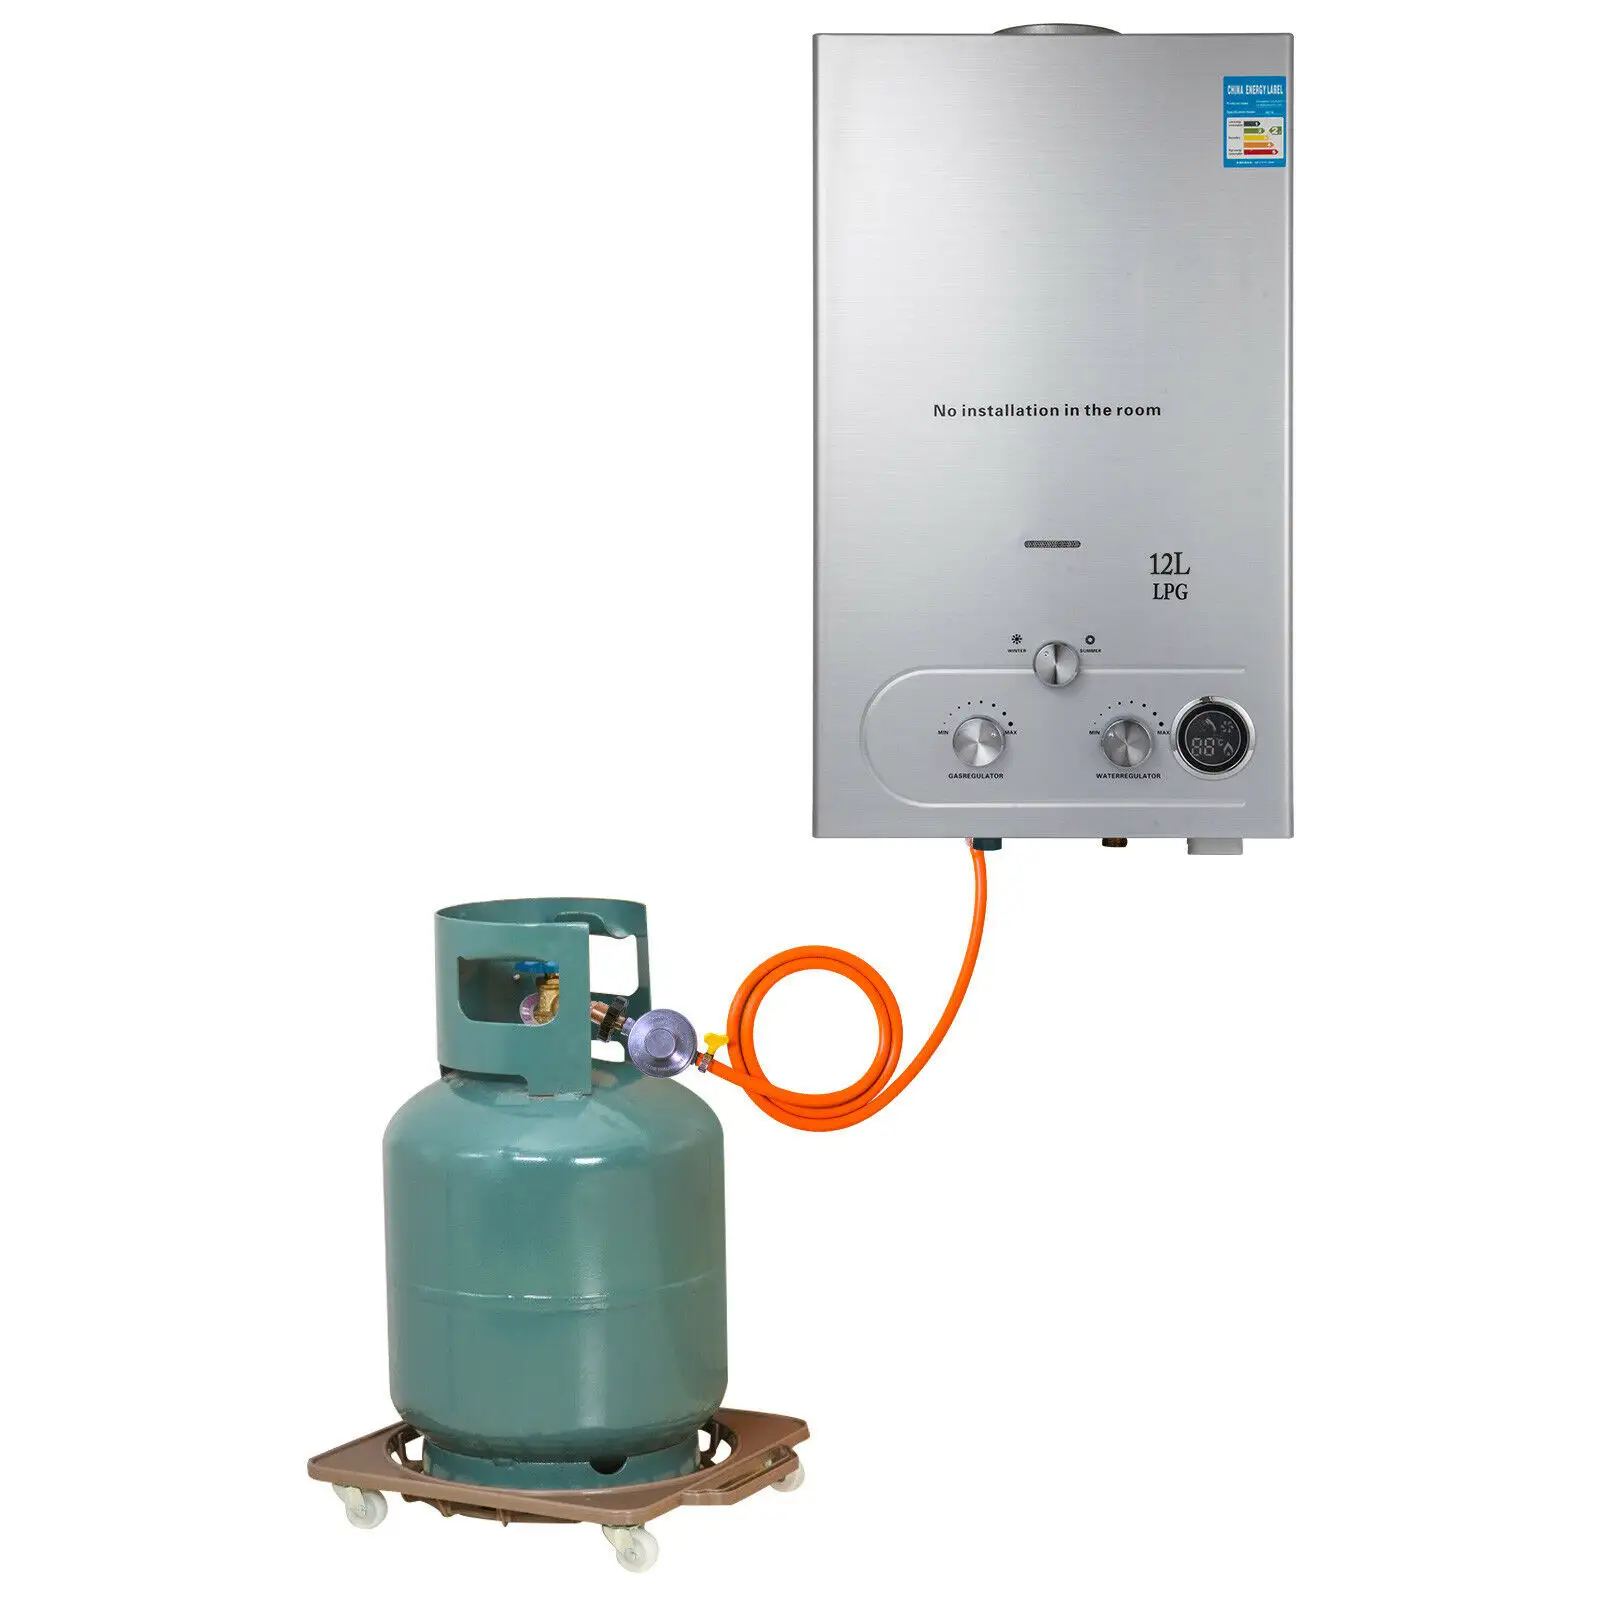 12L LPG Gas Water Heater Domestic Instant Tankless Propane Tankless Gas Water Heater